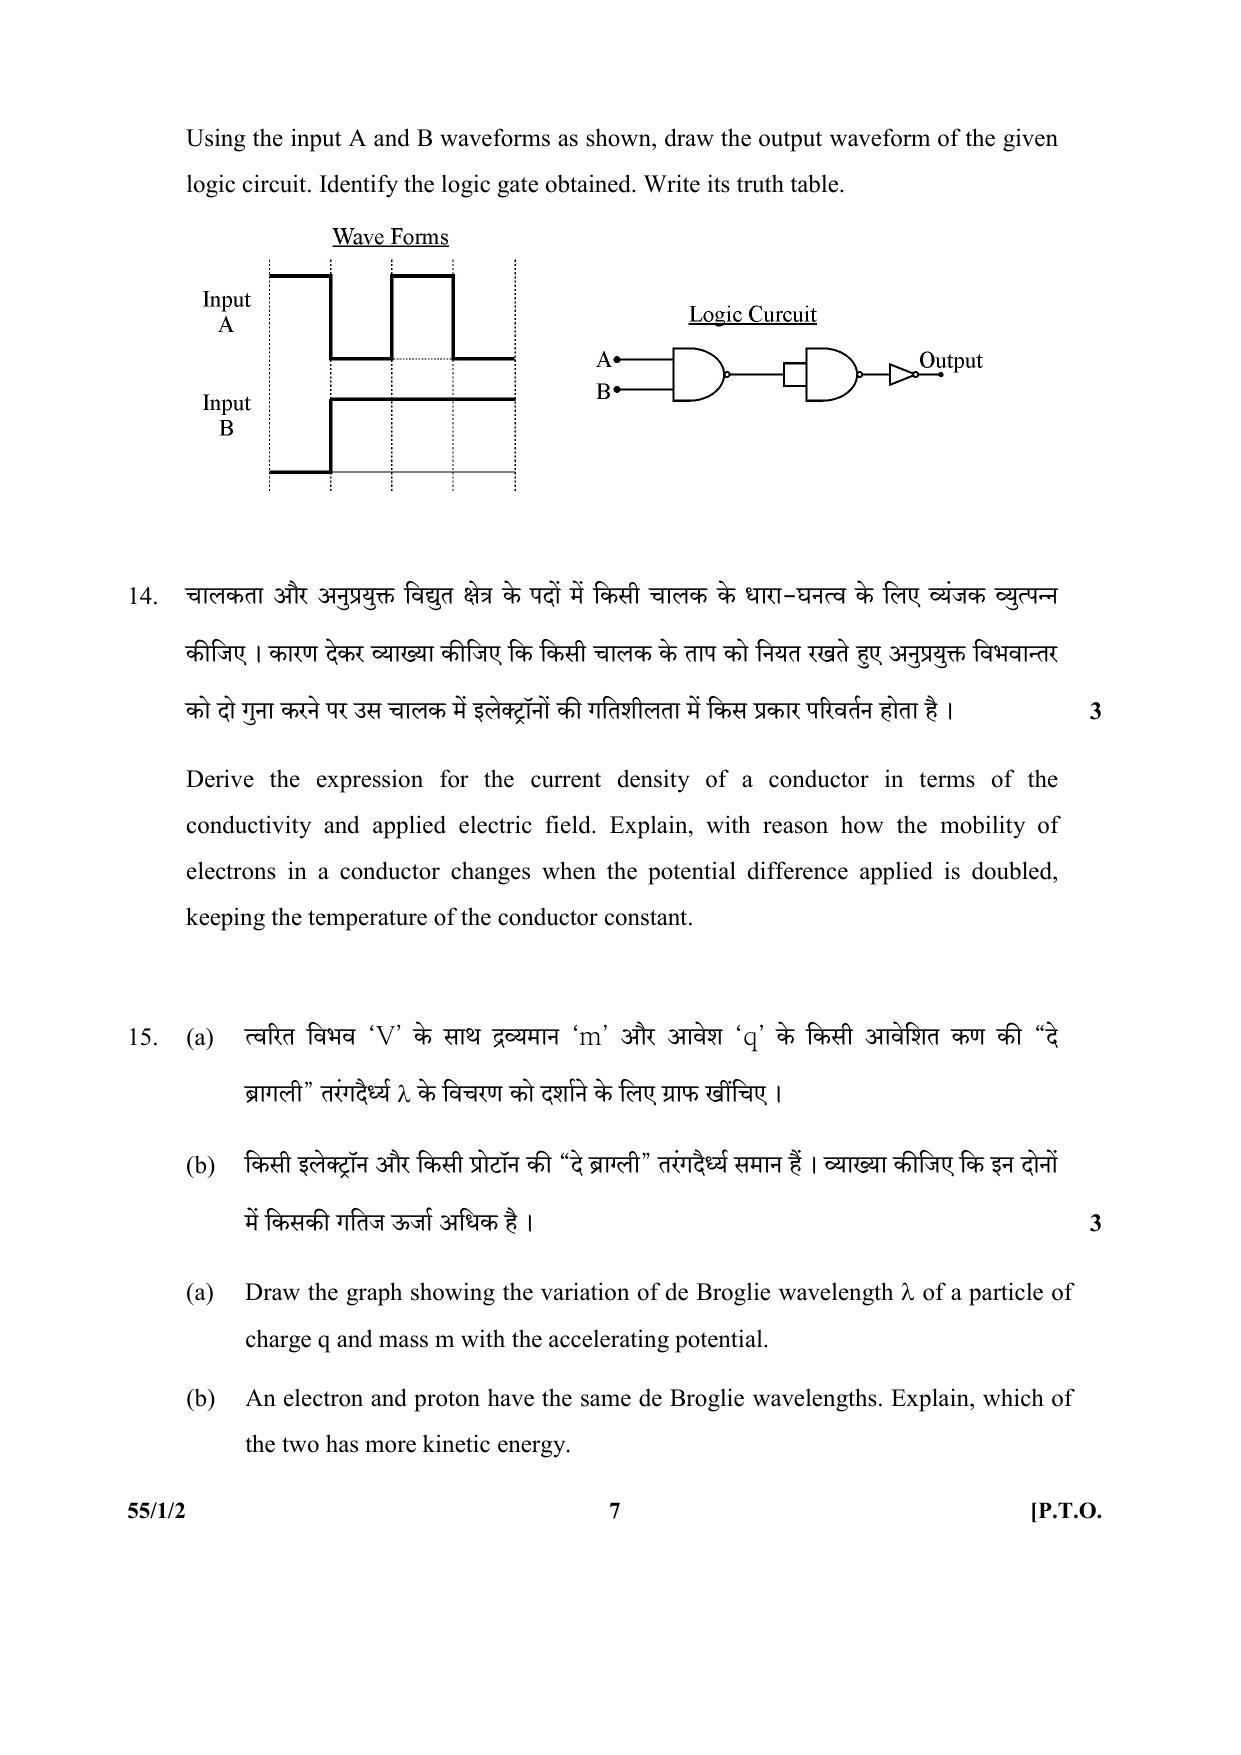 CBSE Class 12 55-1-2 (Physics) 2017-comptt Question Paper - Page 7